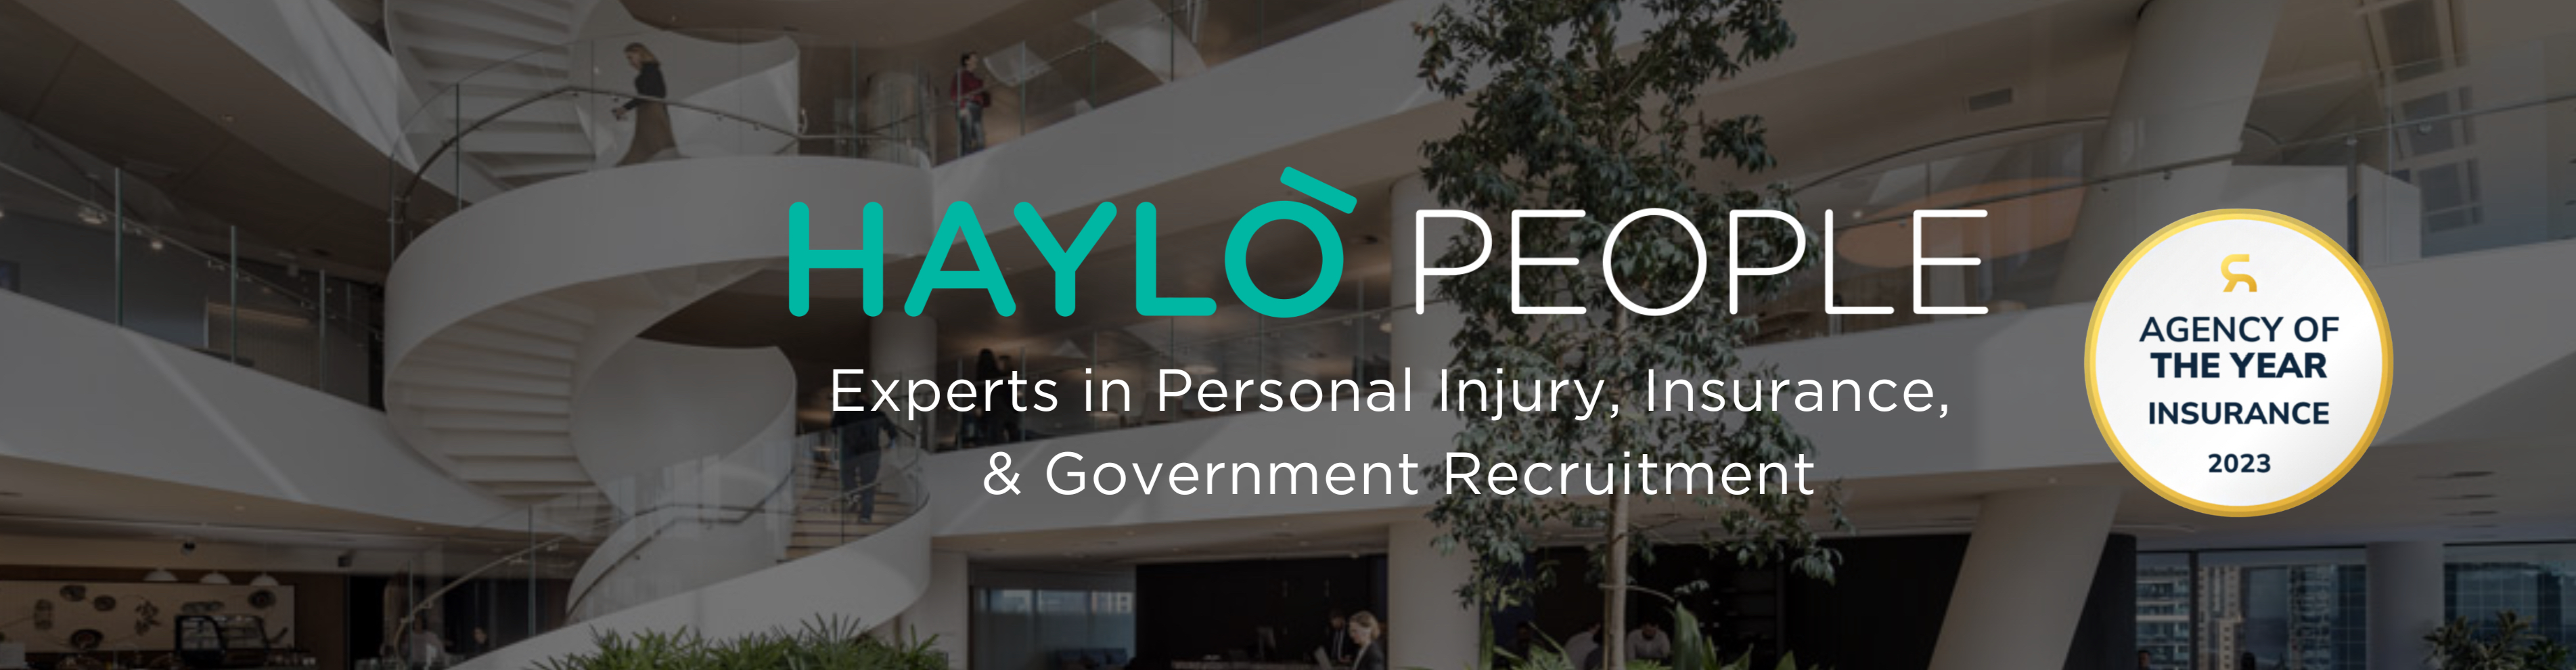 Haylo People banner